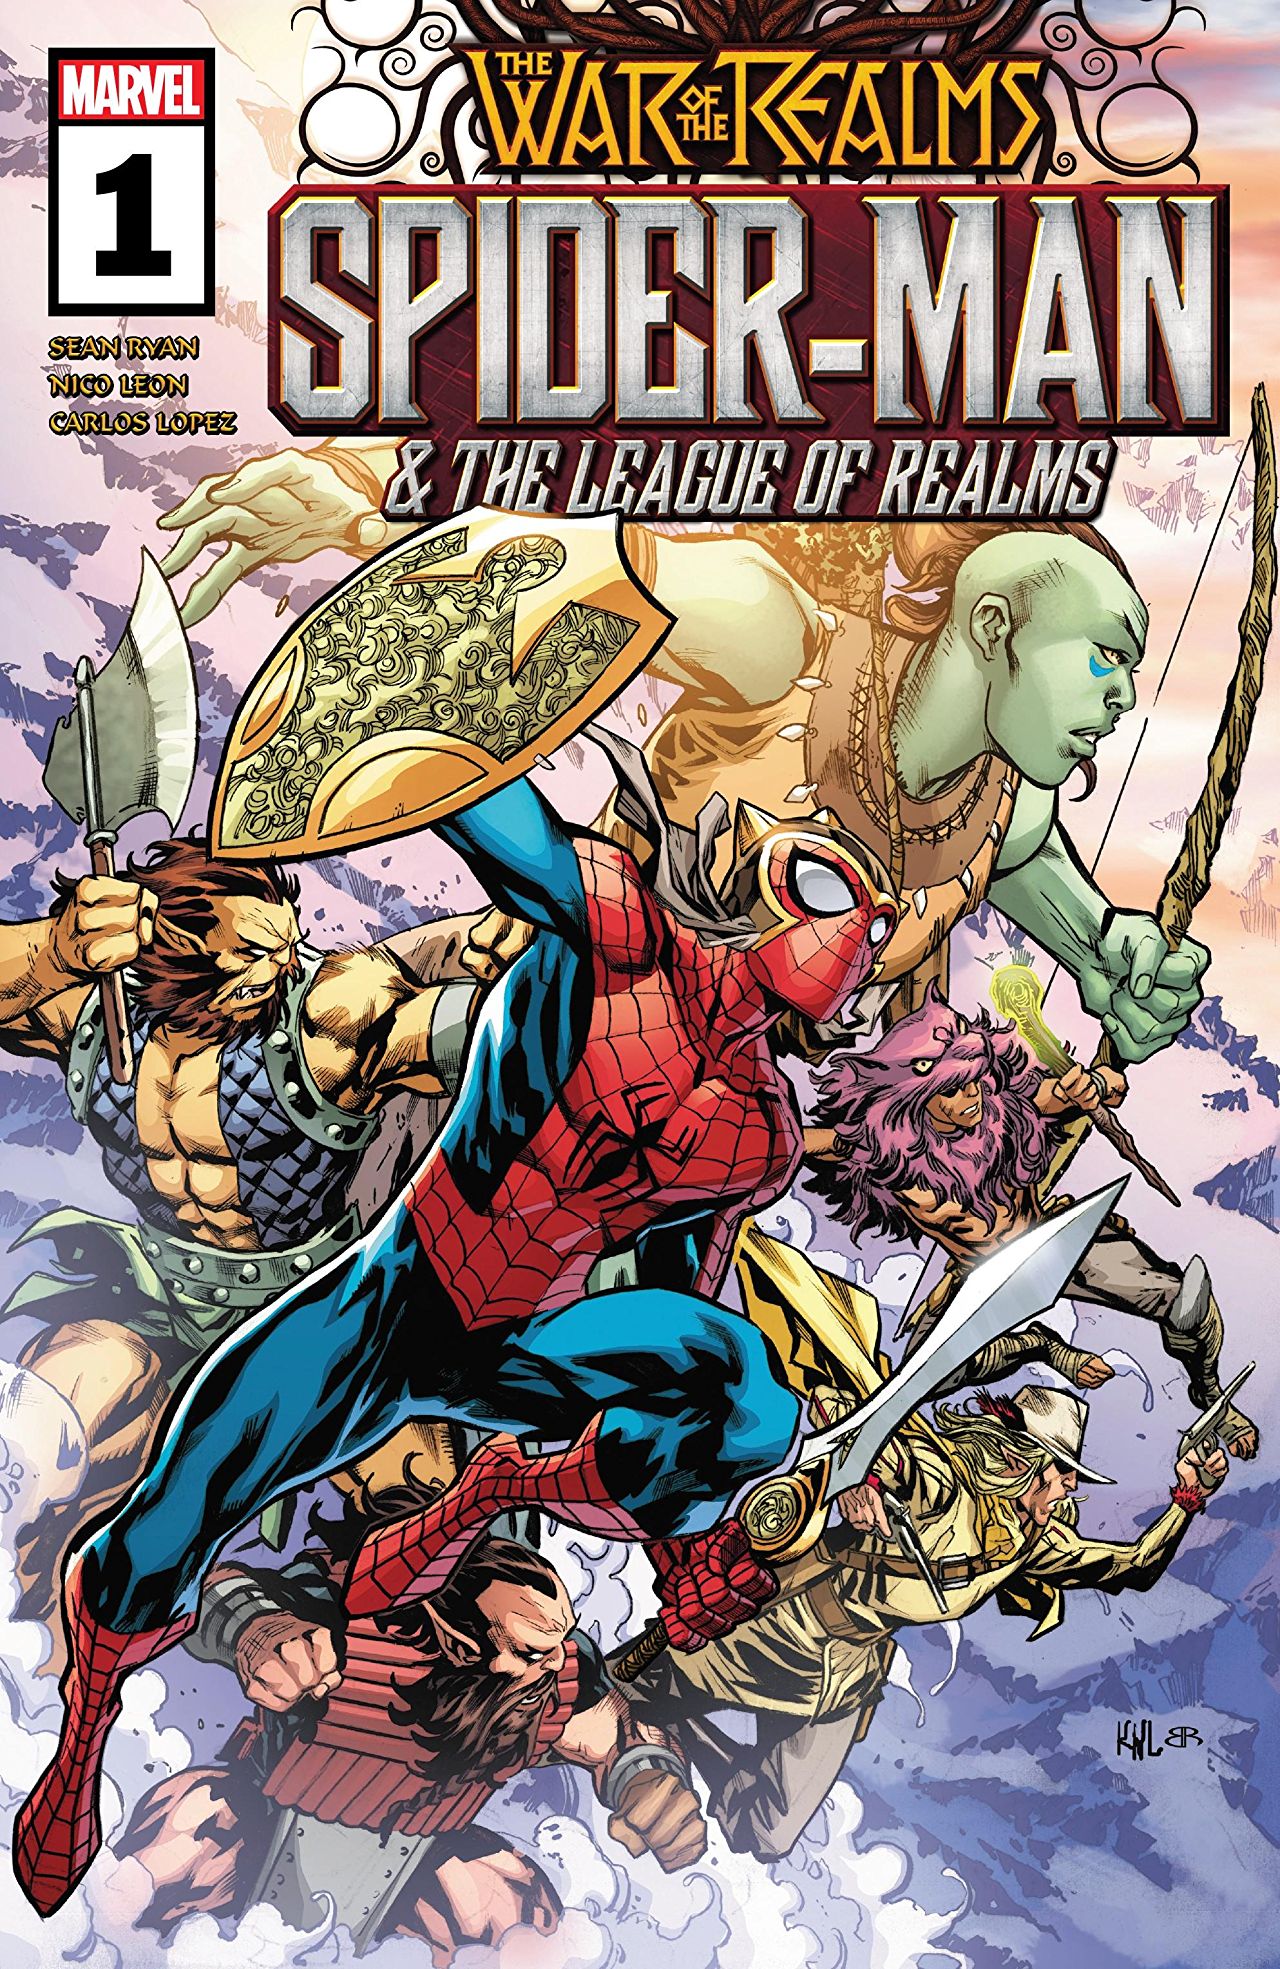 Marvel Preview: Spider-Man & The League of Realms #1